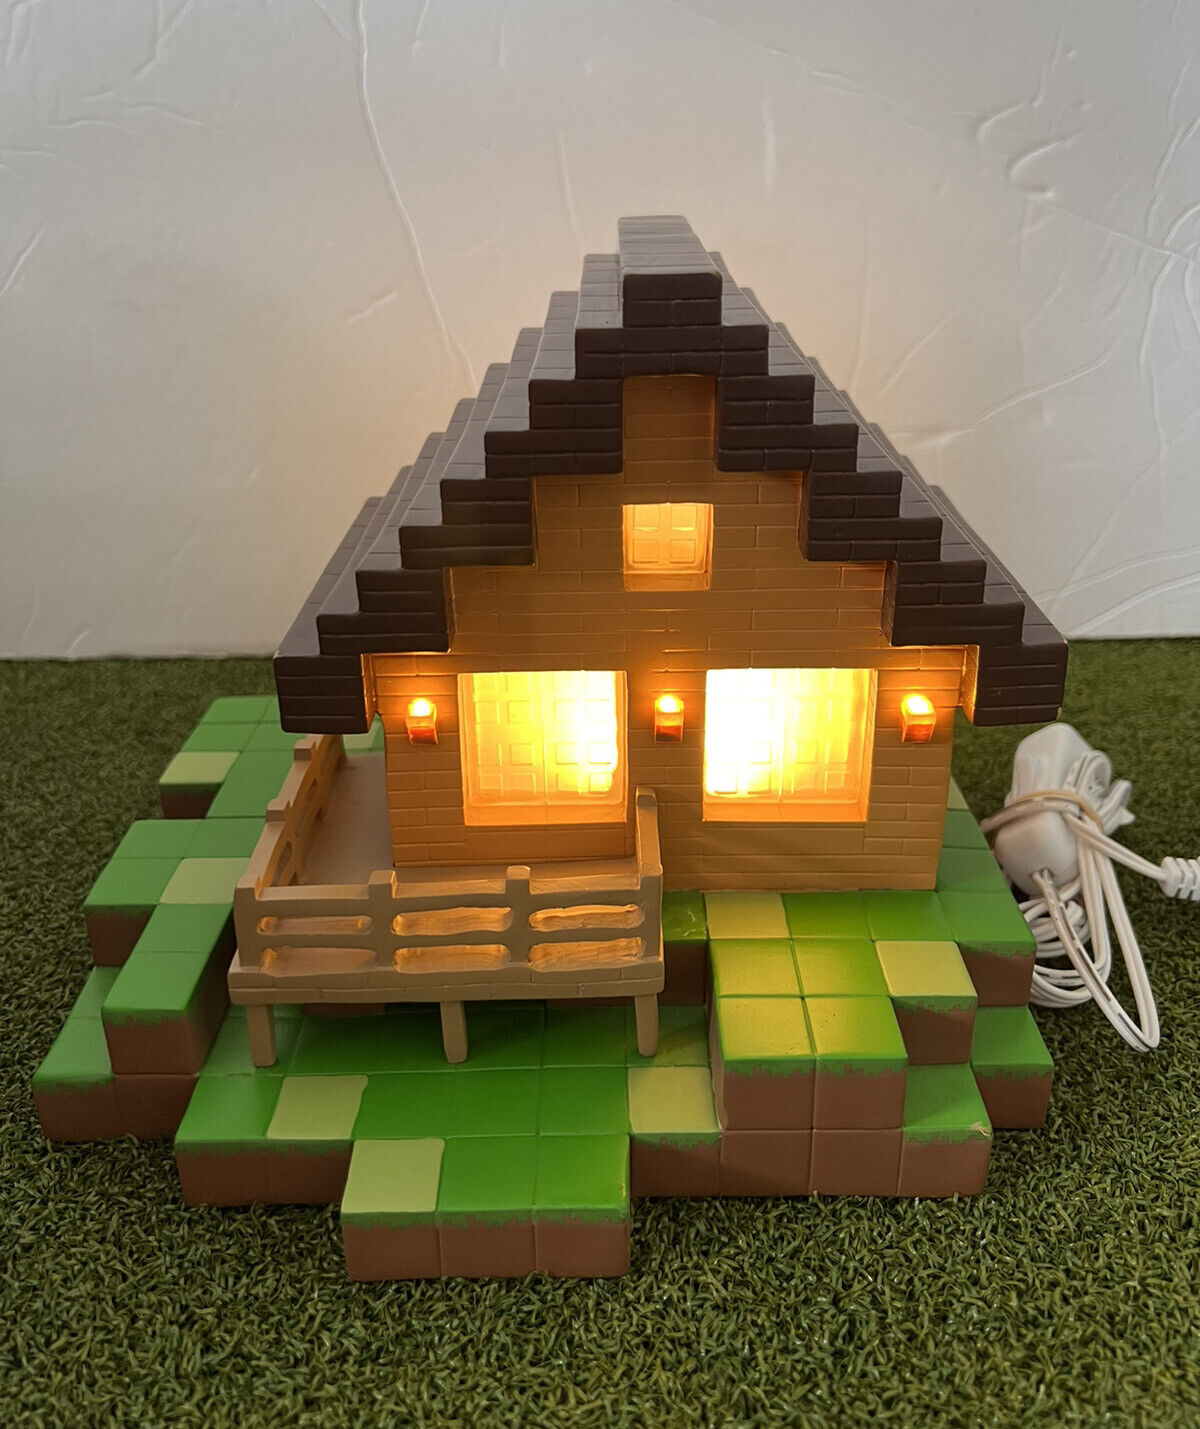 Dept 56 Minecraft Building \'2019 House\' W/Adapter & USB Cord #6004992 Working